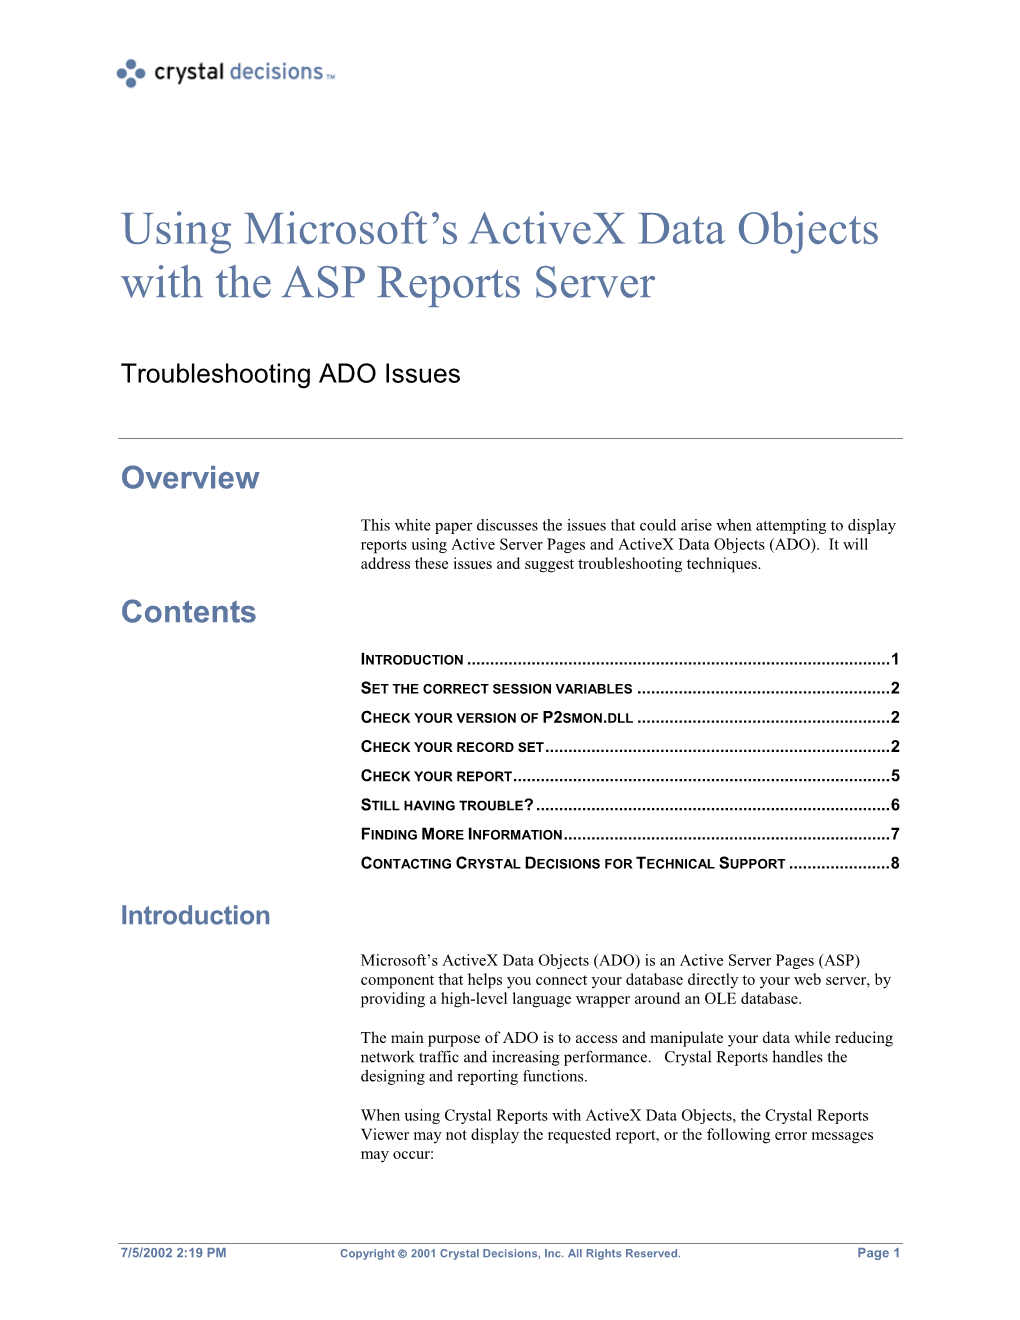 Using Microsoft's Activex Data Objects with the ASP Reports Server